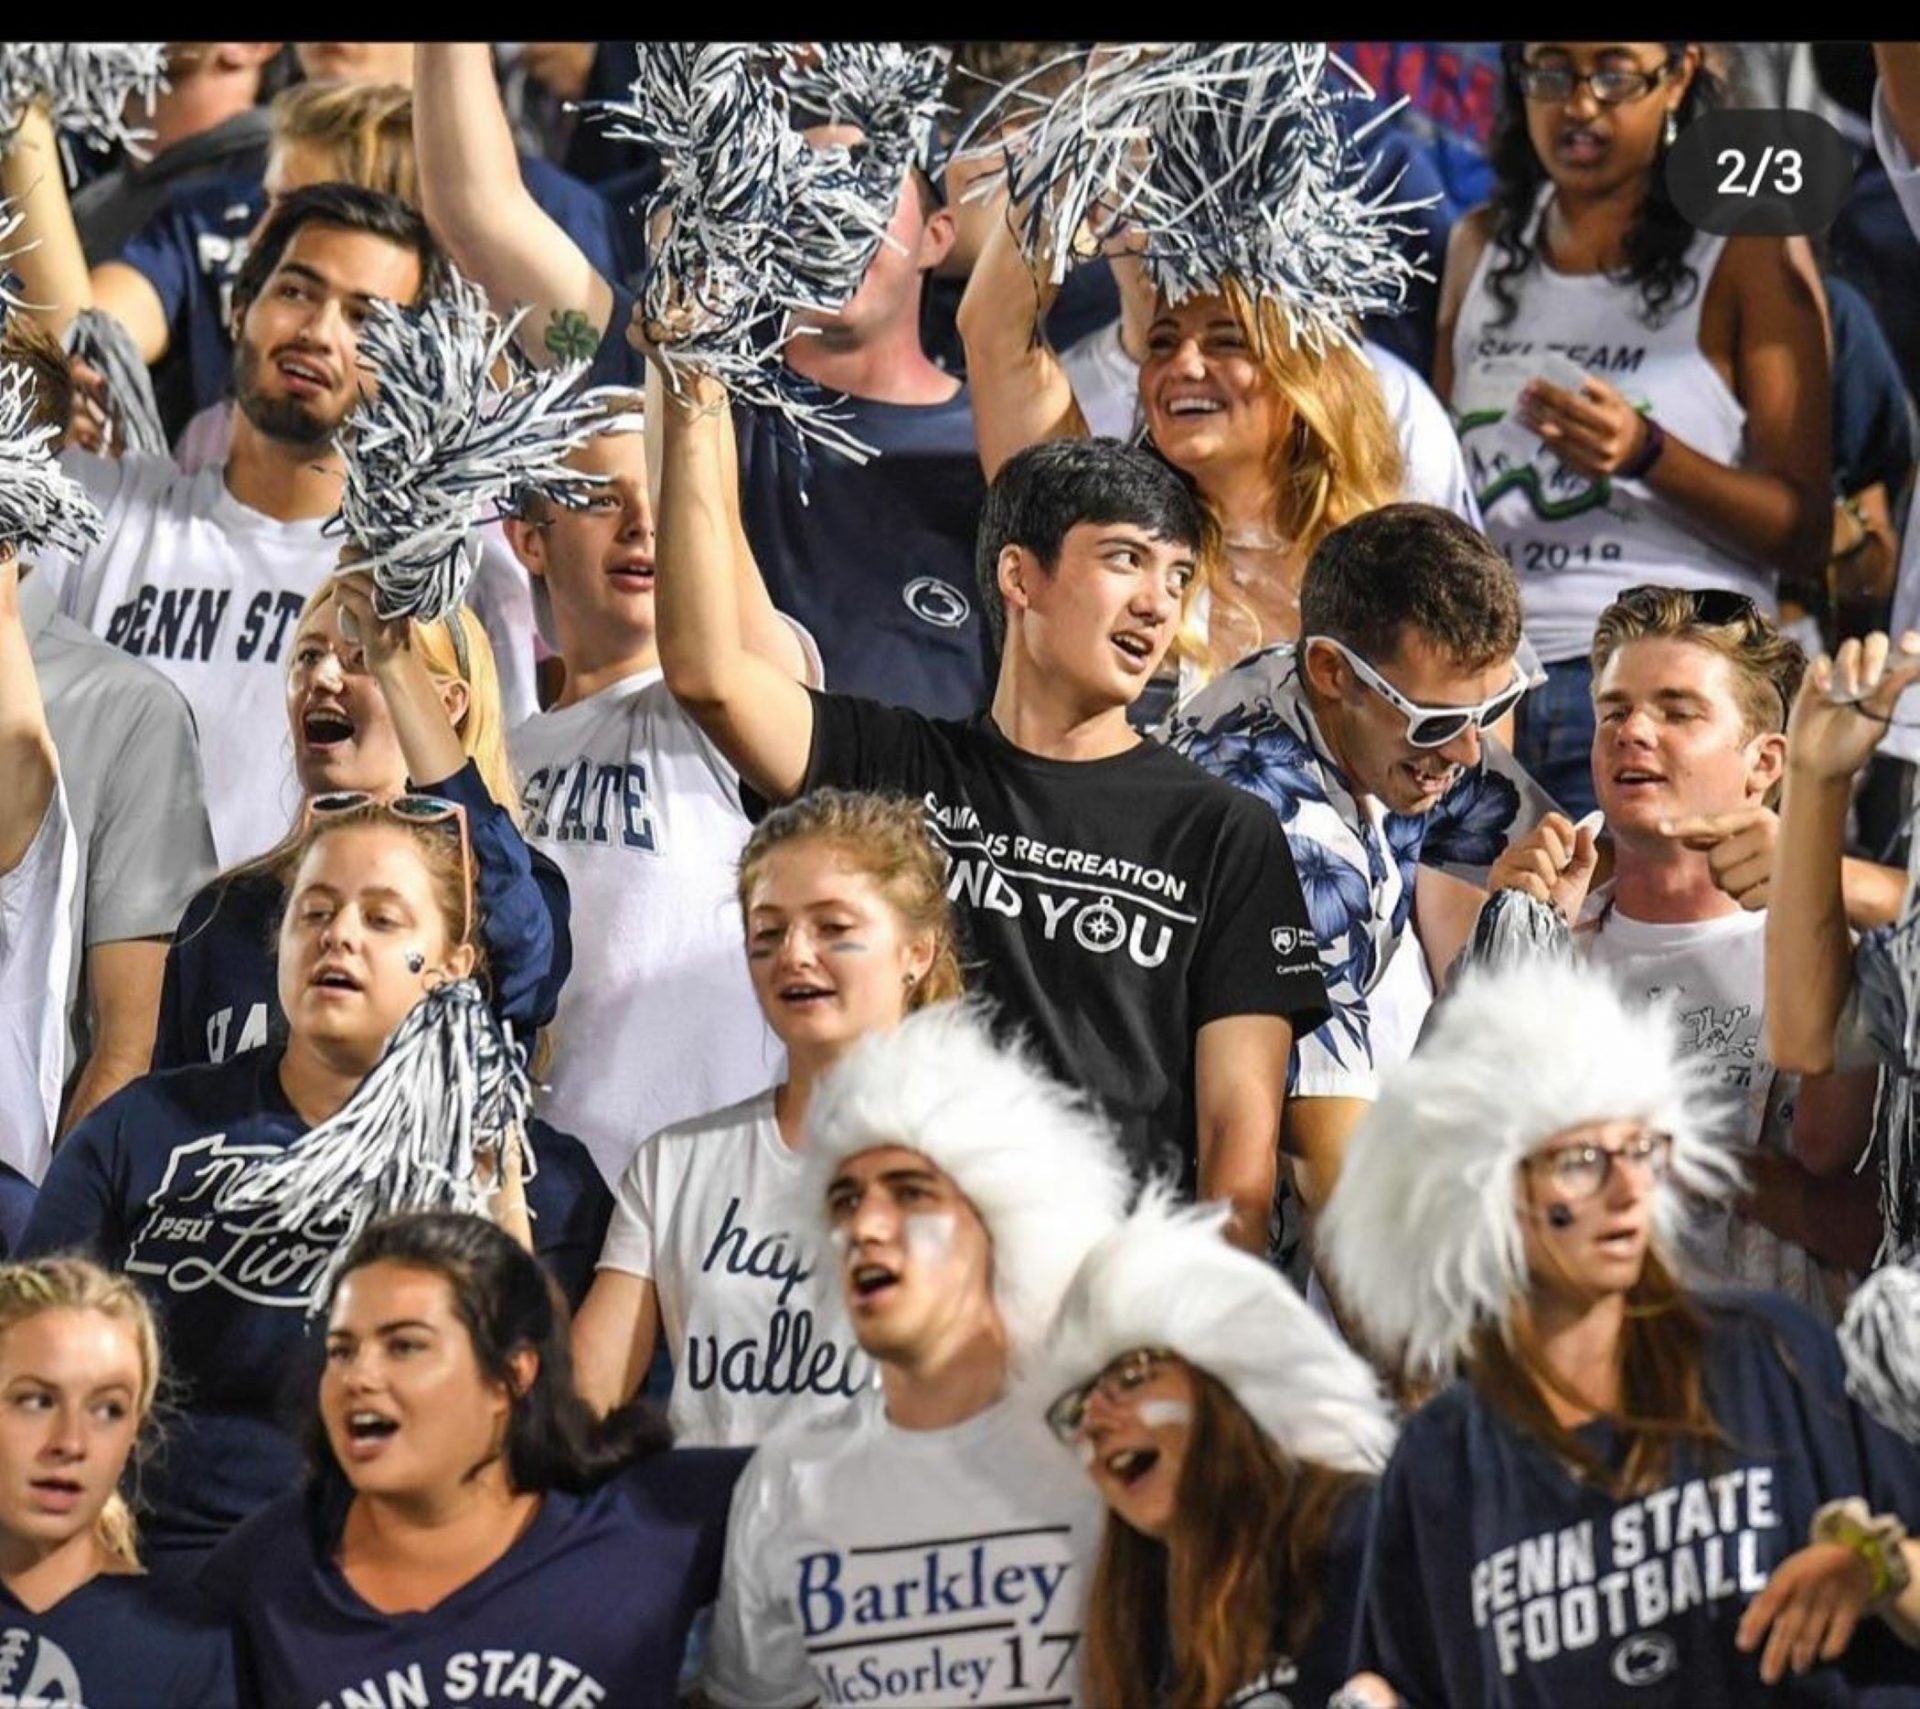 Jarod Yu (center) cheers on the Nittany Lions at a Penn State football game.